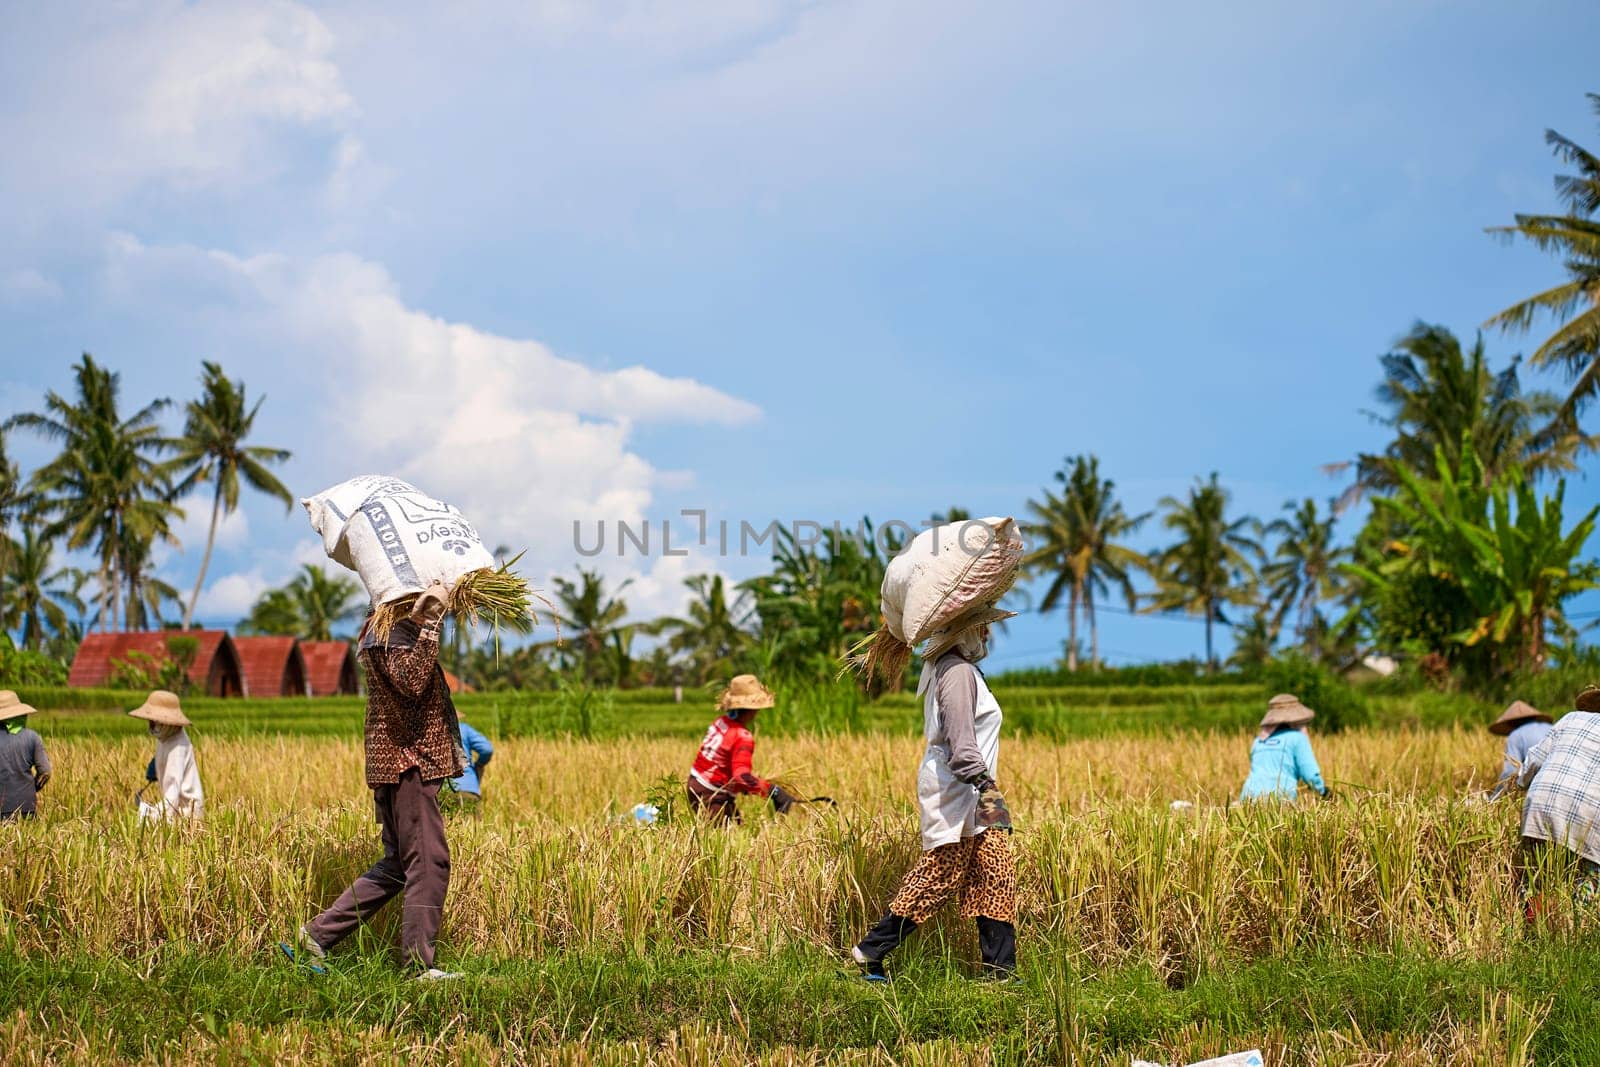 Harvest season in a rice field. An Asian farmer carries a bag of mowed rice on his head. Bali, Indonesia - 12.03.2022